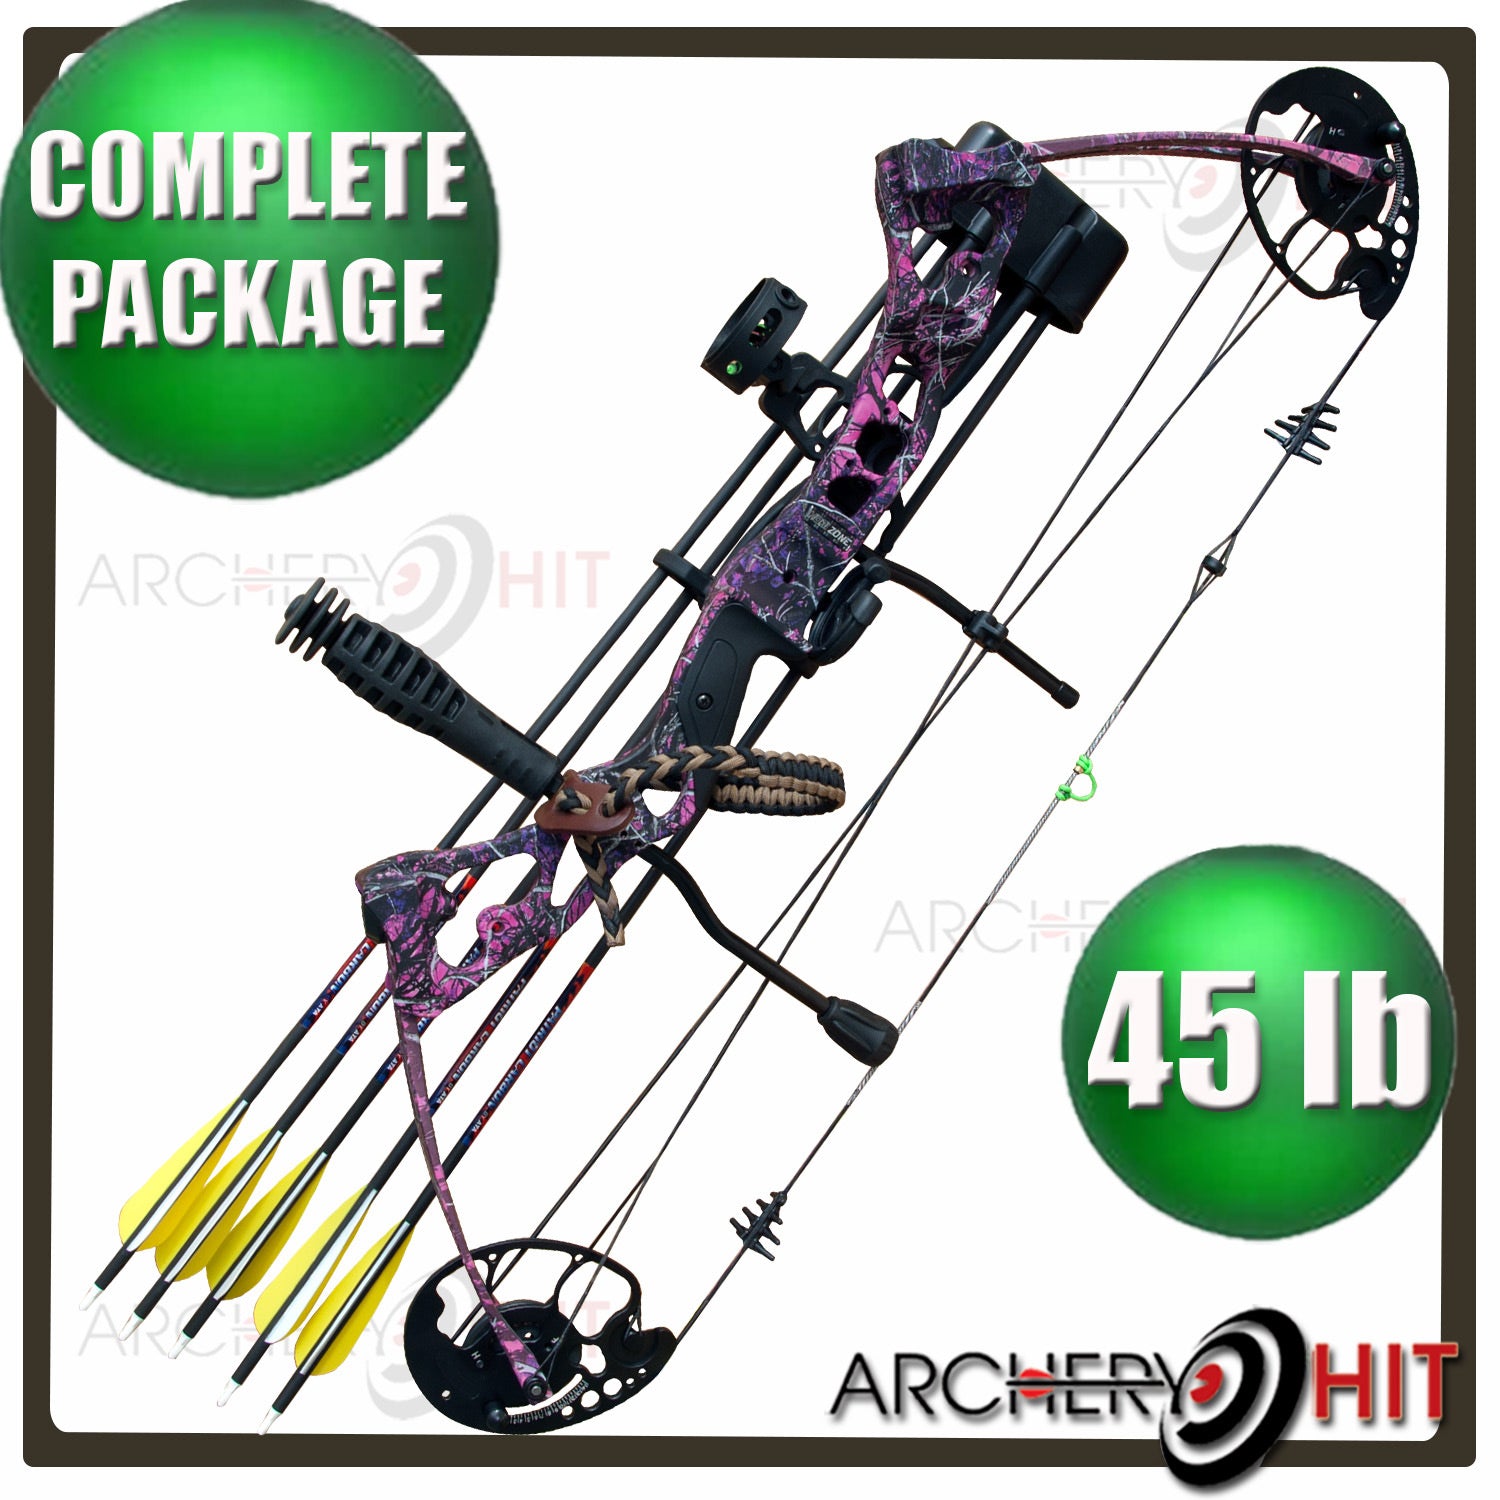 Vulture Carbon Muddy Girl Pink 25-45lb Compound Bow RTS